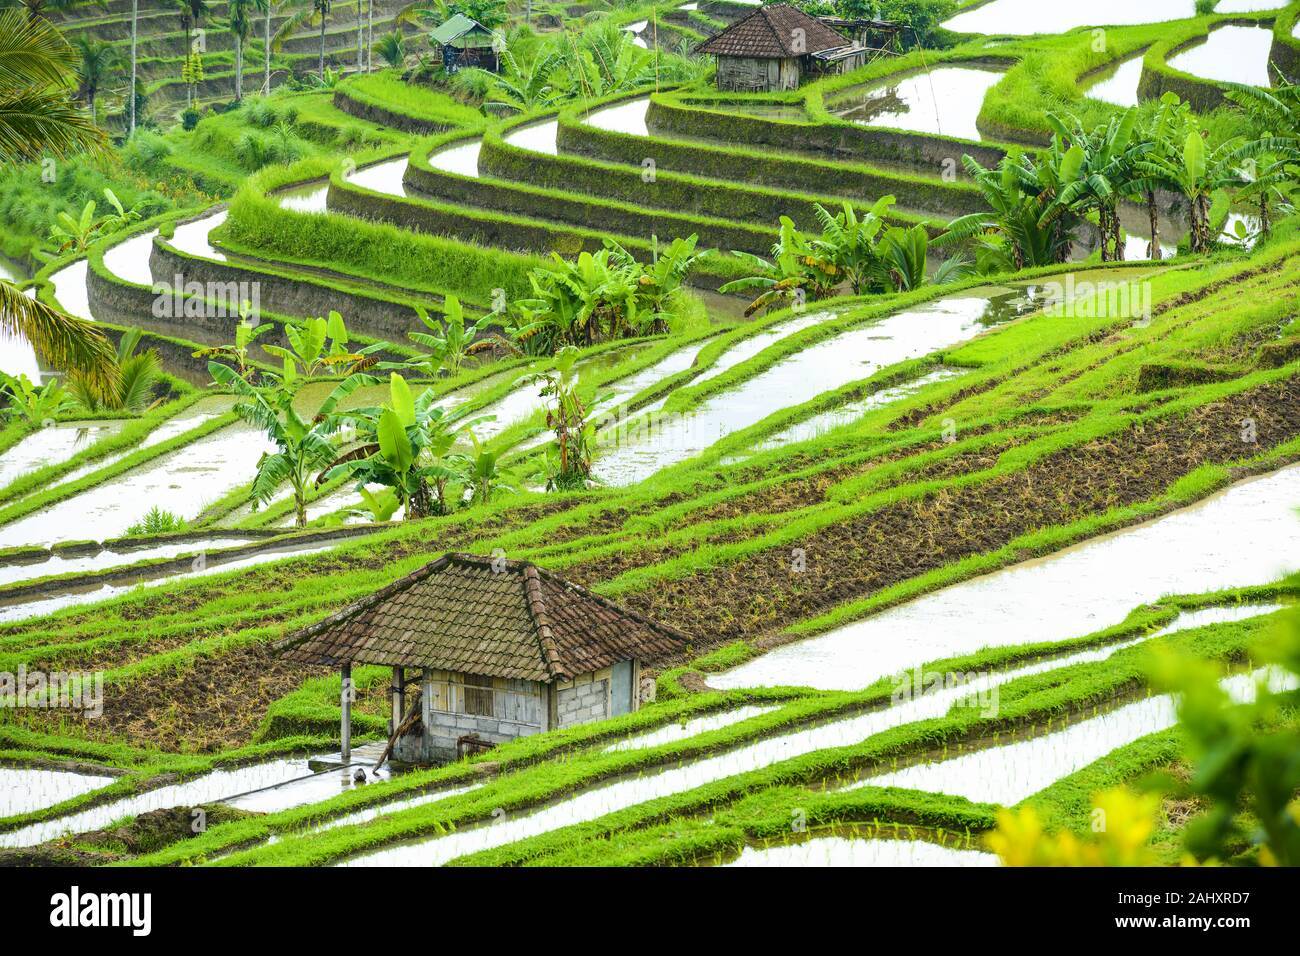 (Selective focus) Stunning view of the Jatiluwih rice terrace fields with some farmers huts. Stock Photo